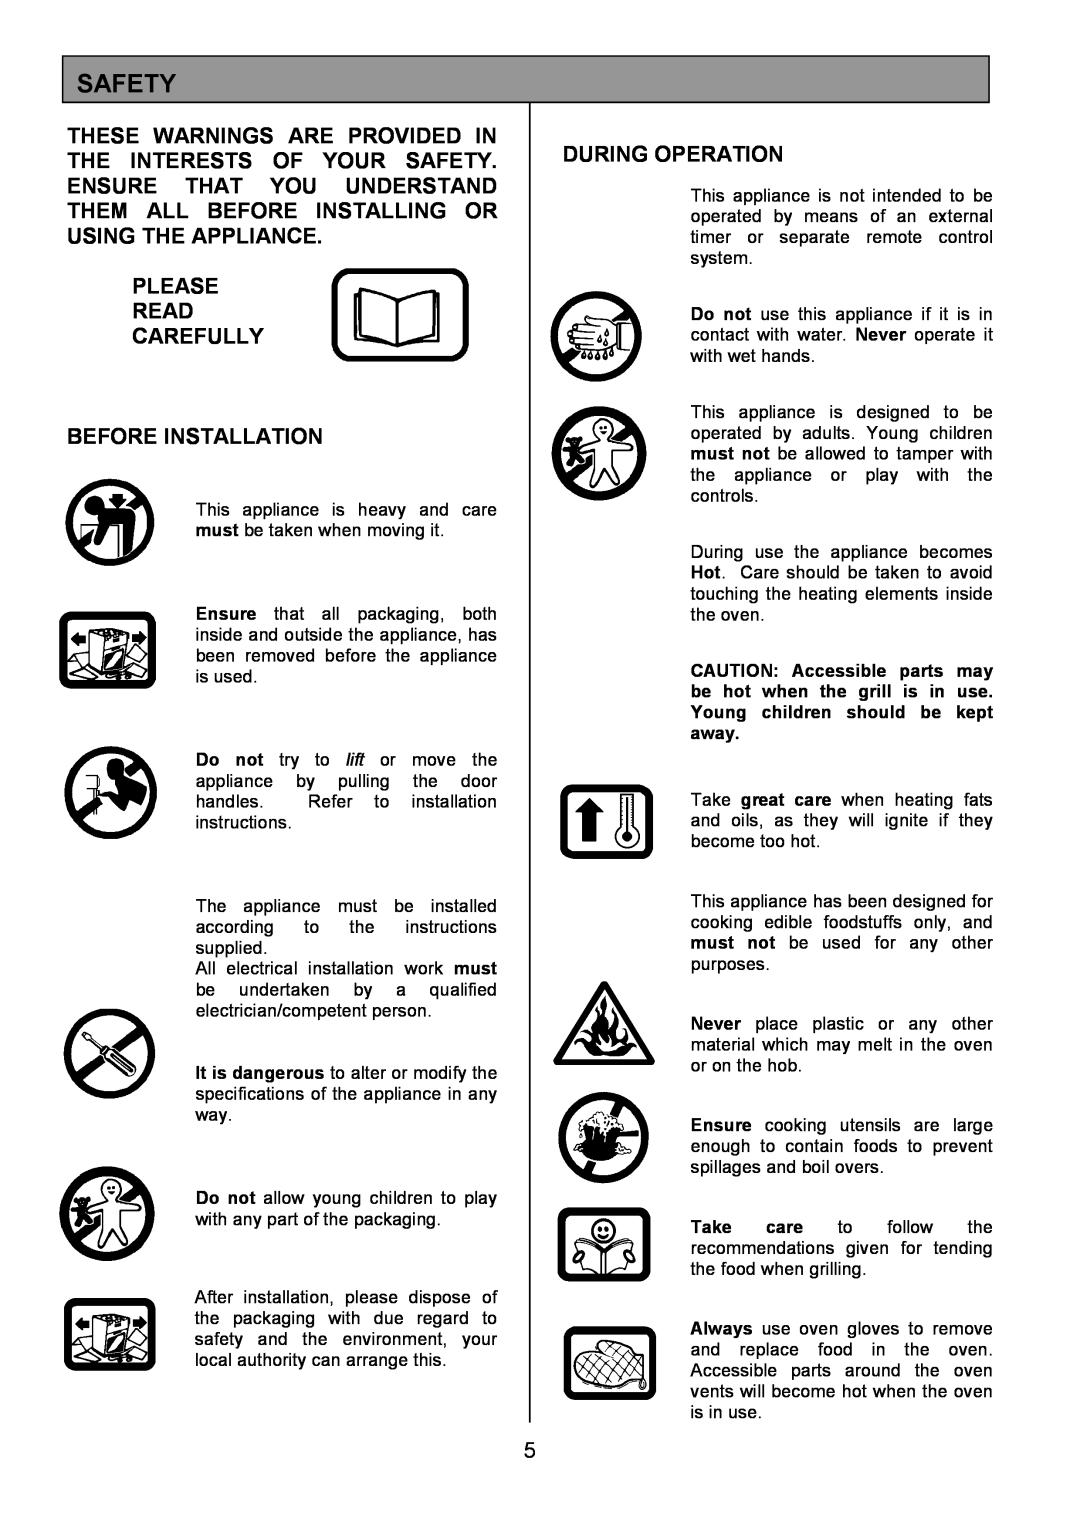 Electrolux EOD6390 manual Safety, Please Read Carefully Before Installation, During Operation 